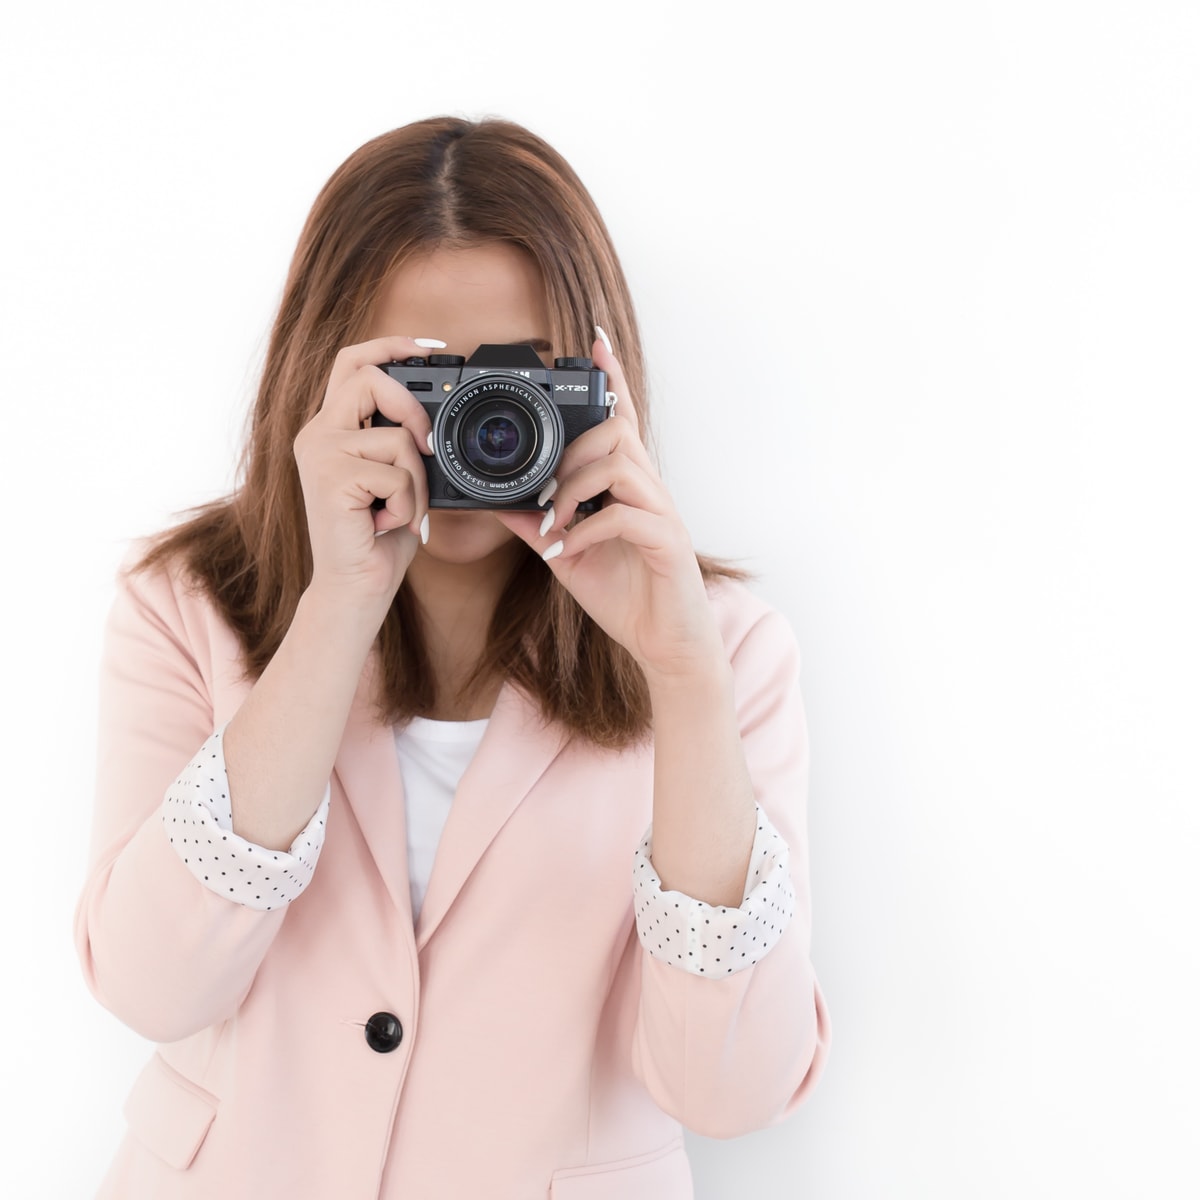 A woman wearing a pink jacket holding a camera to her face